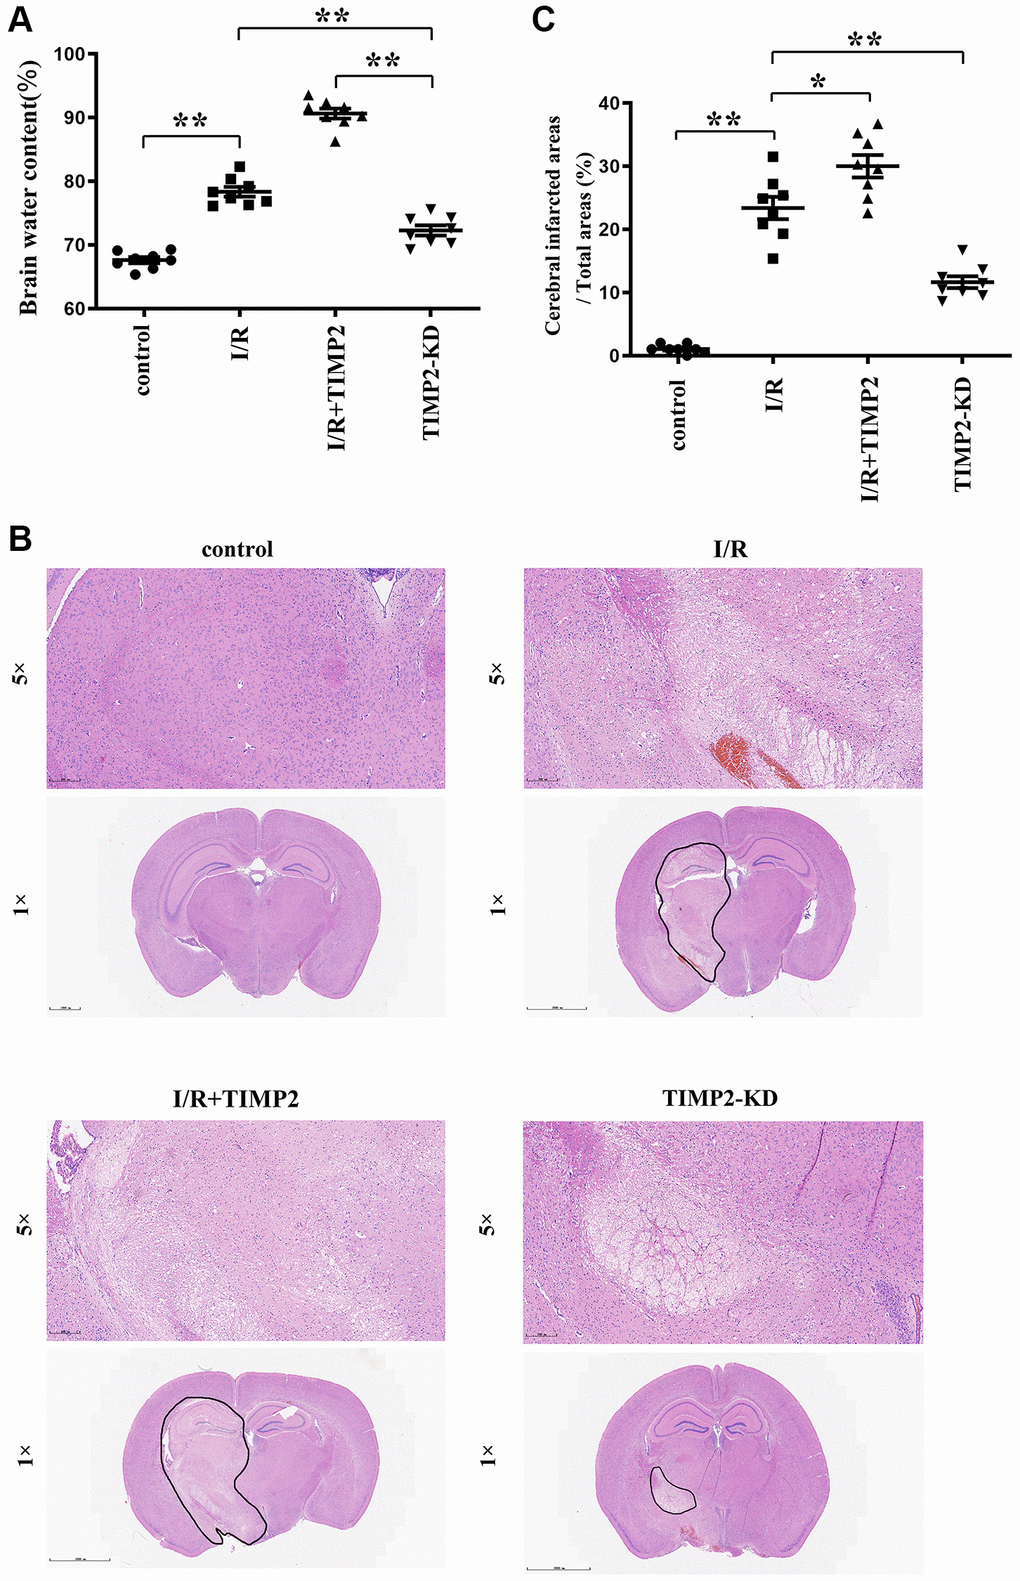 TIMP2 can aggravate brain water content and brain tissue damage in CIRI mice. (A) Brain water content is measured in the control group, I/R group, and I/R+TIMP2 group. Brain water content is significantly higher in the I/R group than that in the control group. Furthermore, the use of TIMP2 further increases brain water content in the I/R group. In contrast, brain water content is significantly reduced in the TIMP2-KD group. (B, C) Pathological changes in brain tissues are observed using HE staining in the control group, I/R group, and I/R+TIMP2 group. No pathological changes are observed in the control group, whereas mice in the I/R+TIMP2 group showed larger pathological changes compared with the I/R group. Conversely, the pathological area in the brain tissues of mice in the TIMP2-KD group becomes smaller. **P *P 